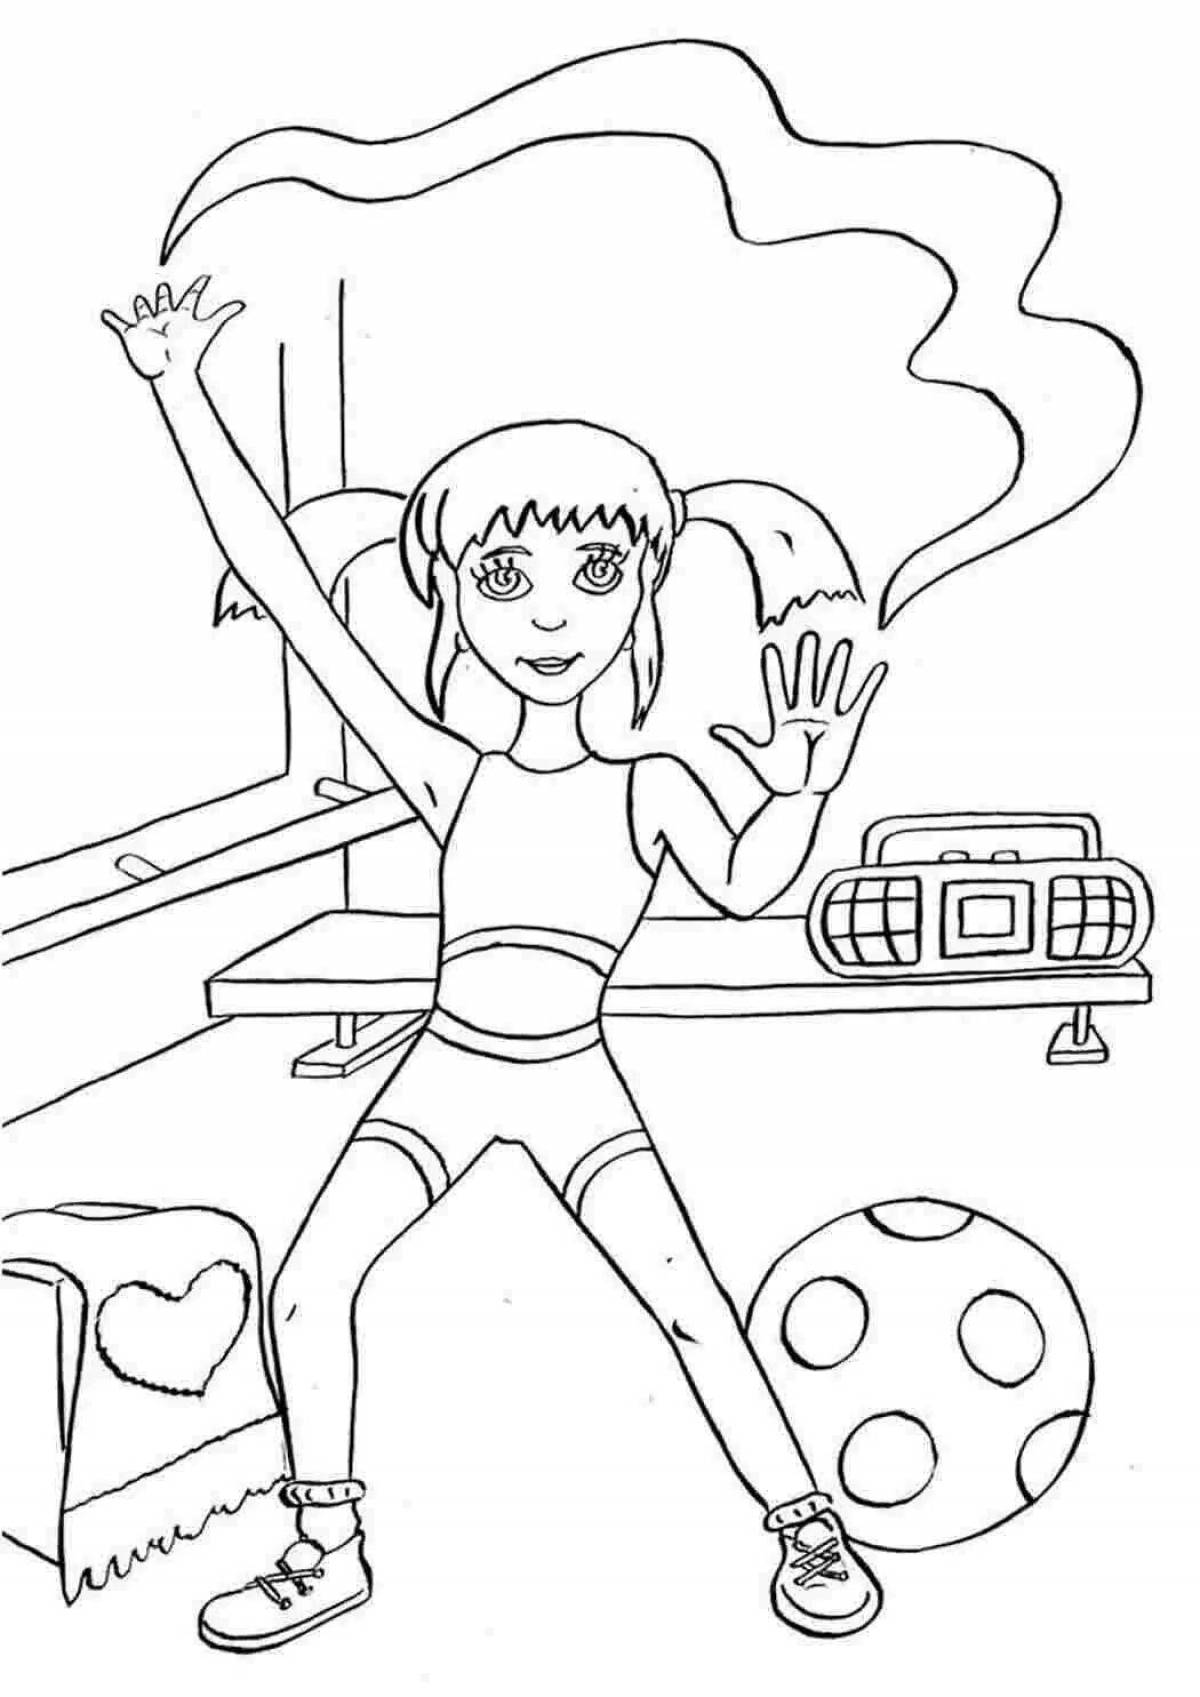 Inspirational health and sports coloring book